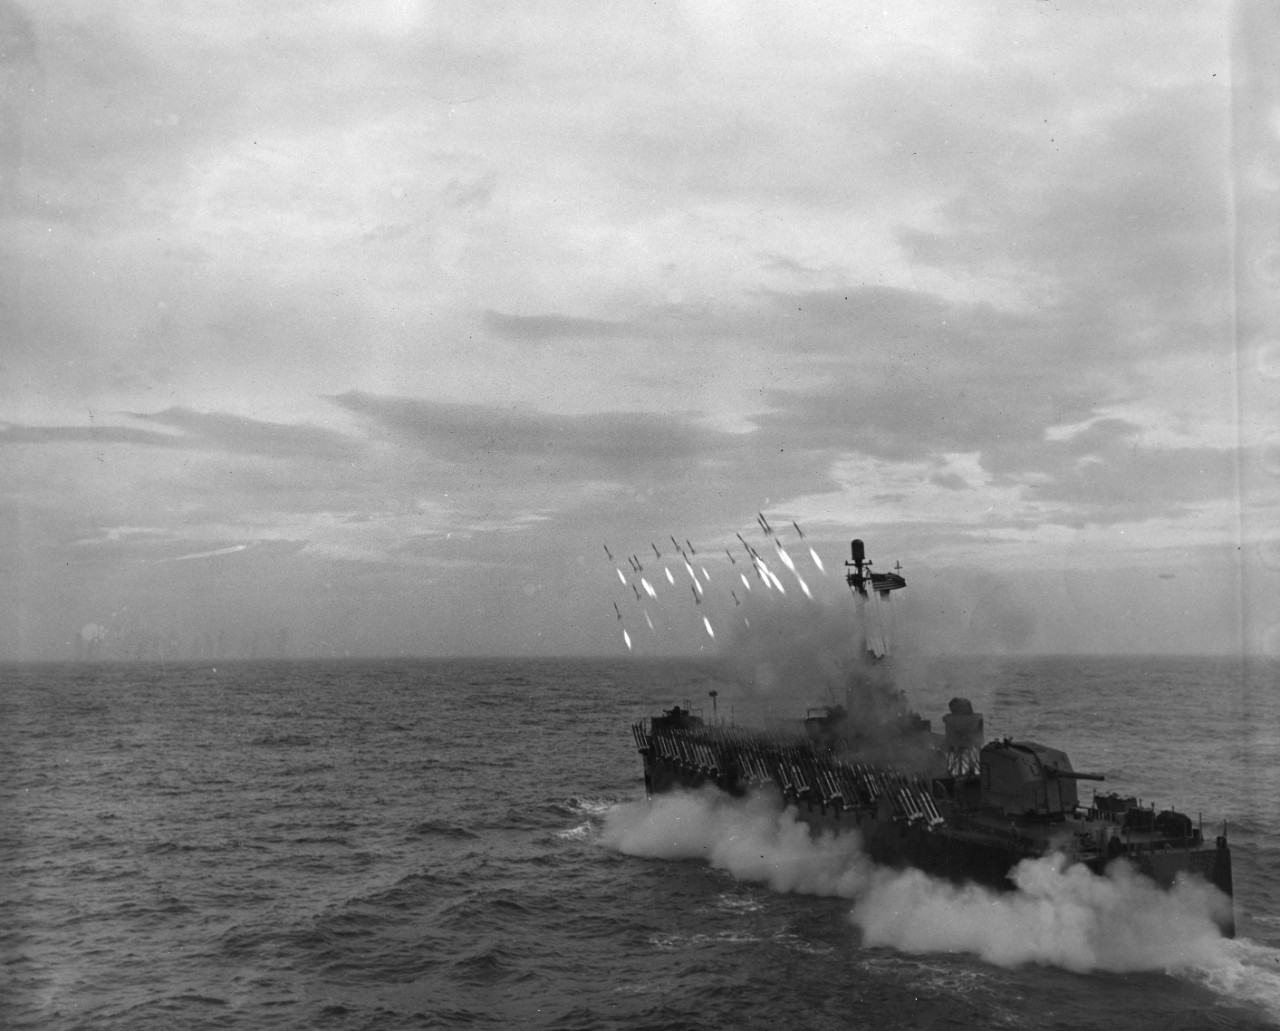 Leaping from their launchers like racehorses from the starter's barrier, a salvo of rockets heads towards a distant target as a Navy LSM(R) (Landing Ship Medium (Rocket)) undergoes drills. Light and mobile, but packing a terrific punch, rockets have played a major role in World War II.